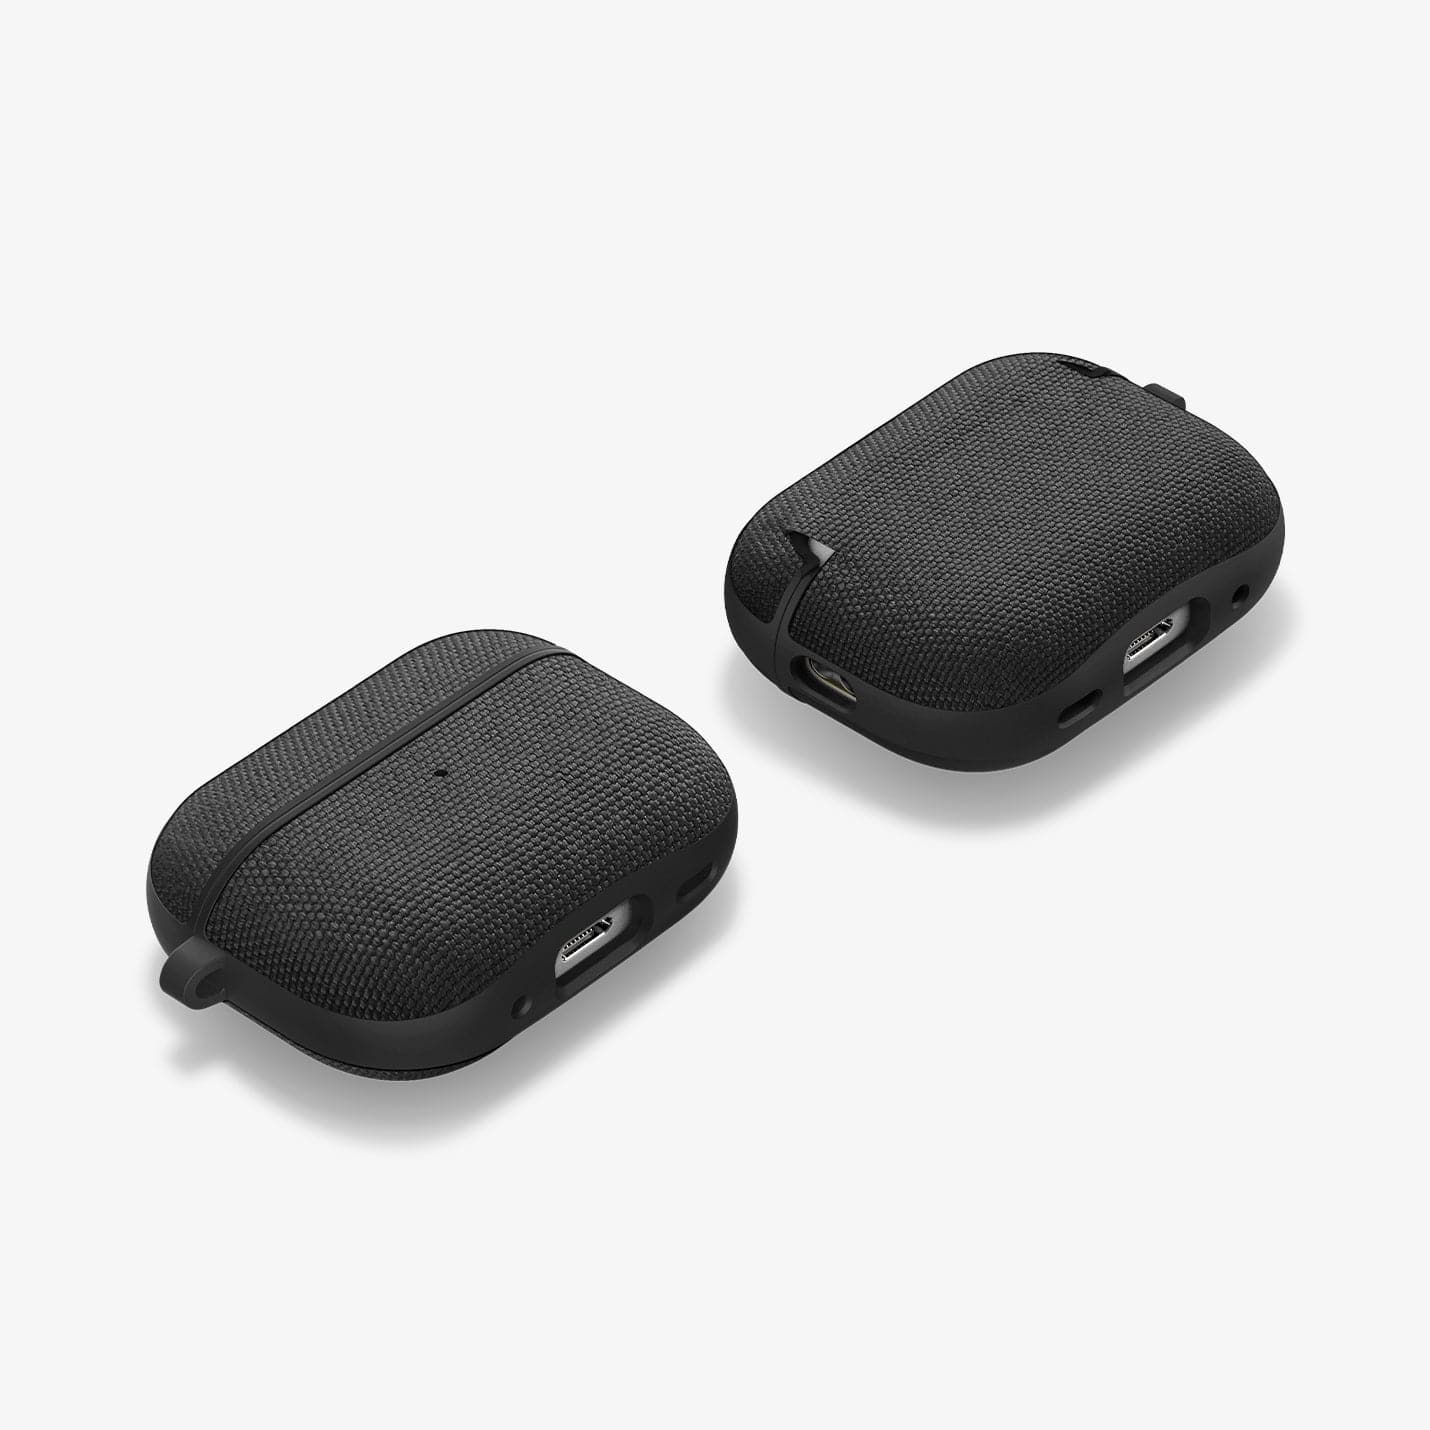 ACS05483 - Apple AirPods Pro 2 Case Urban Fit in black showing the front, back and sides